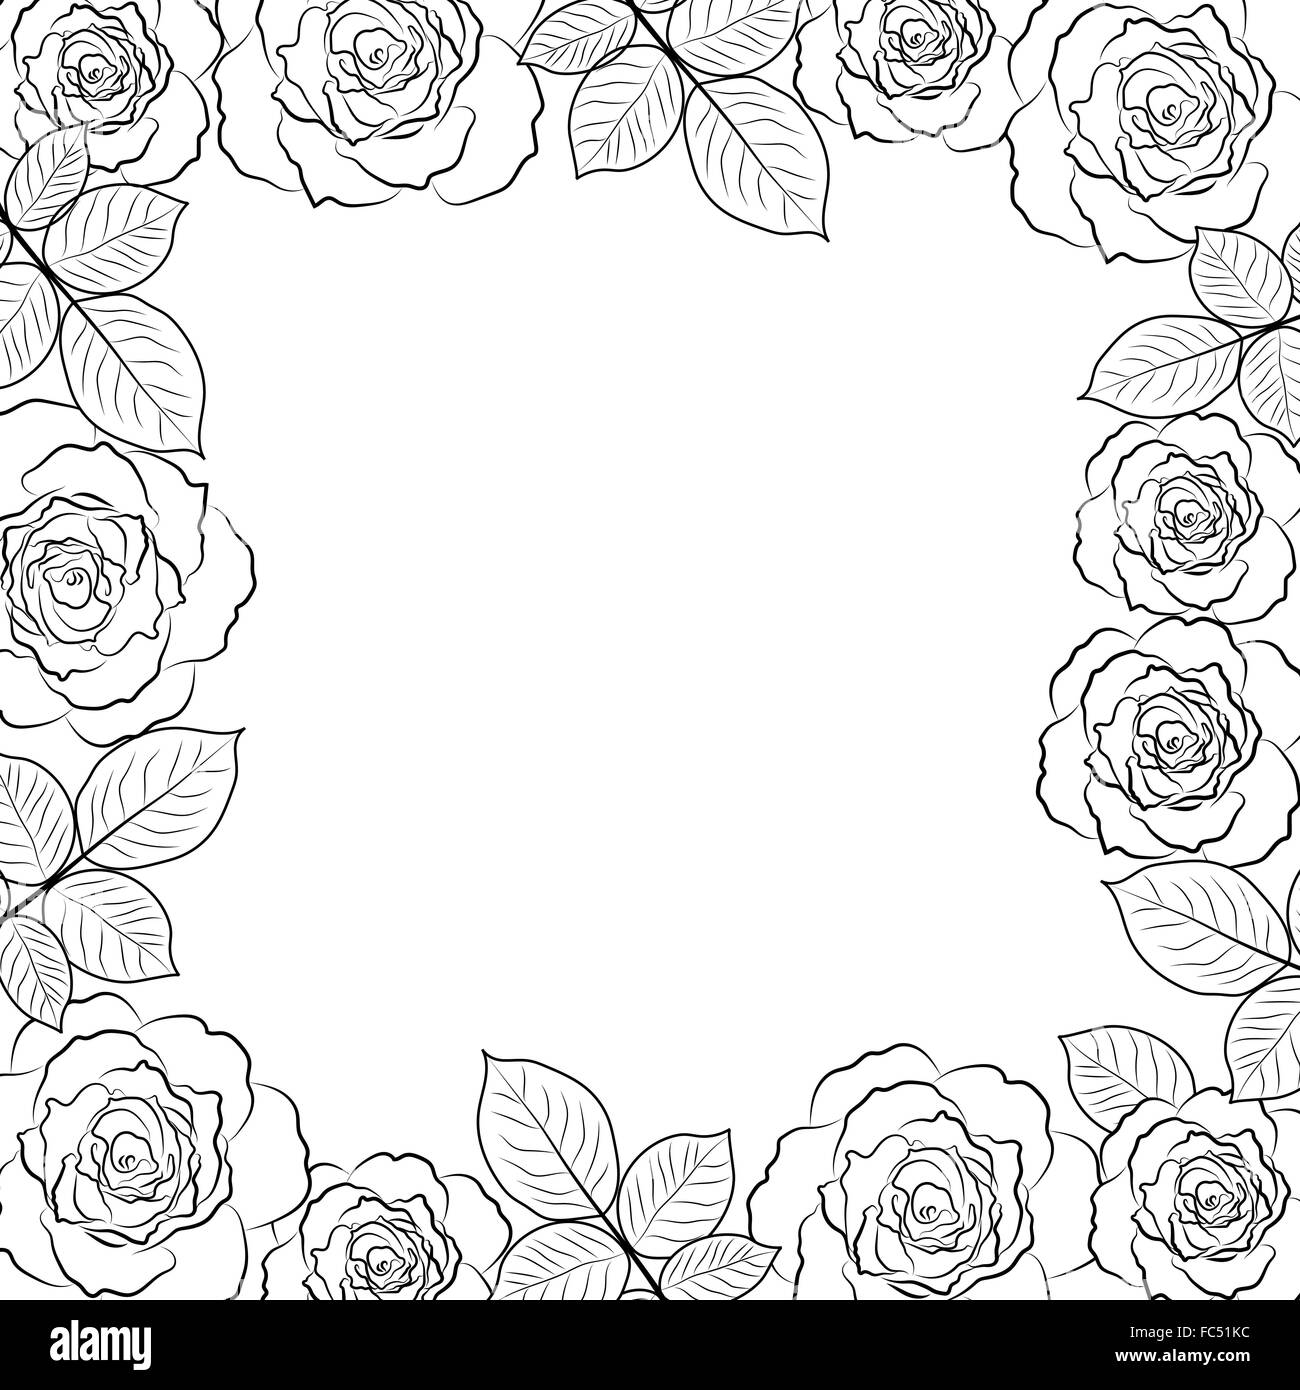 Geometric floral frame with rose flowers. Black outline simple desing  isolated on white background. Vector illustration.